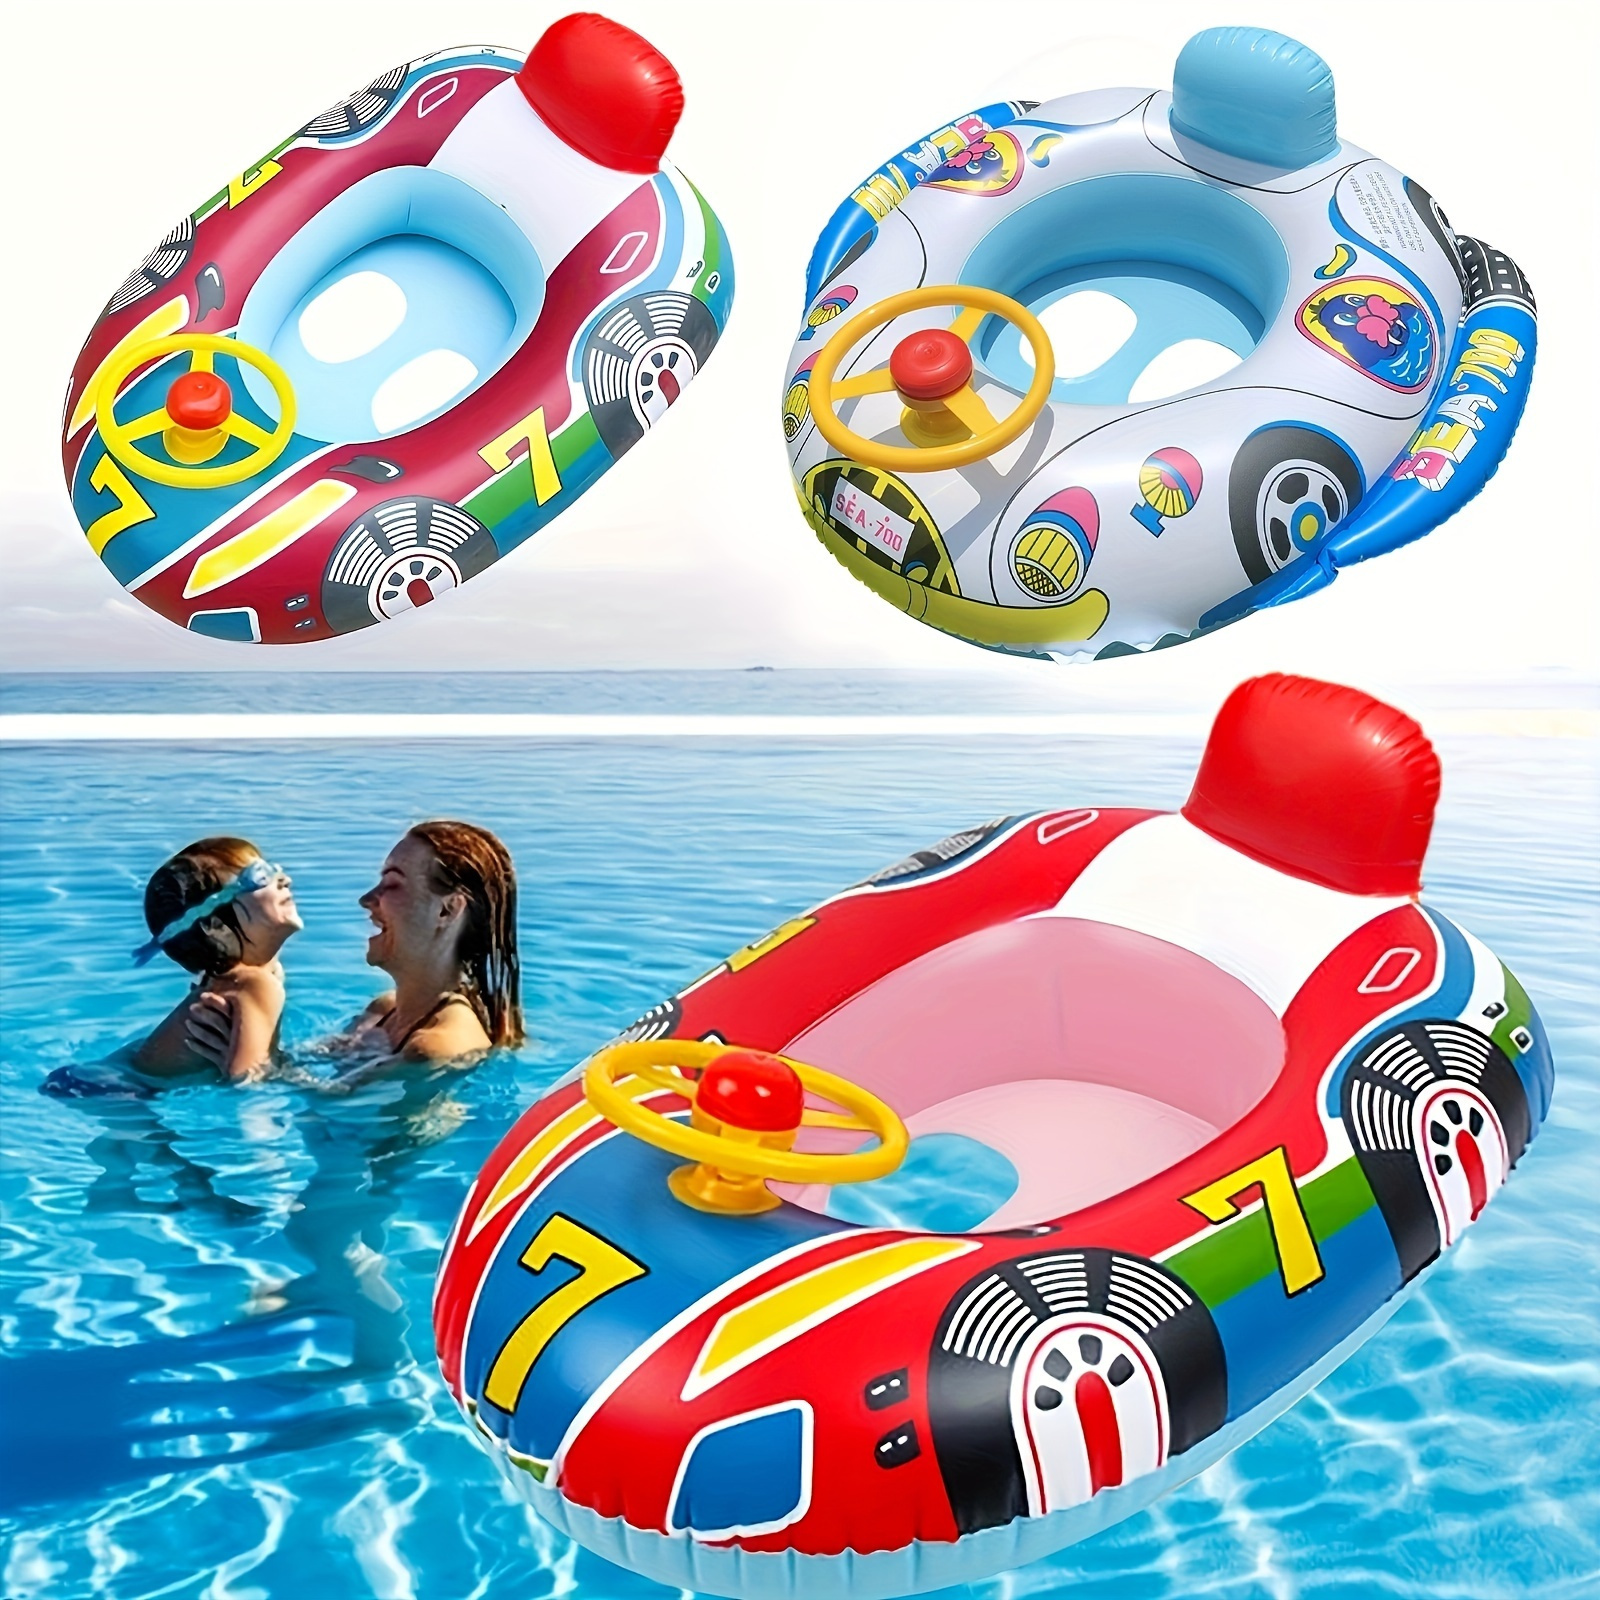 

Police Vehicle And Boat Combo - Durable Pvc, Suitable For Youngsters 3-6 Years, Excludes Inflation Pump